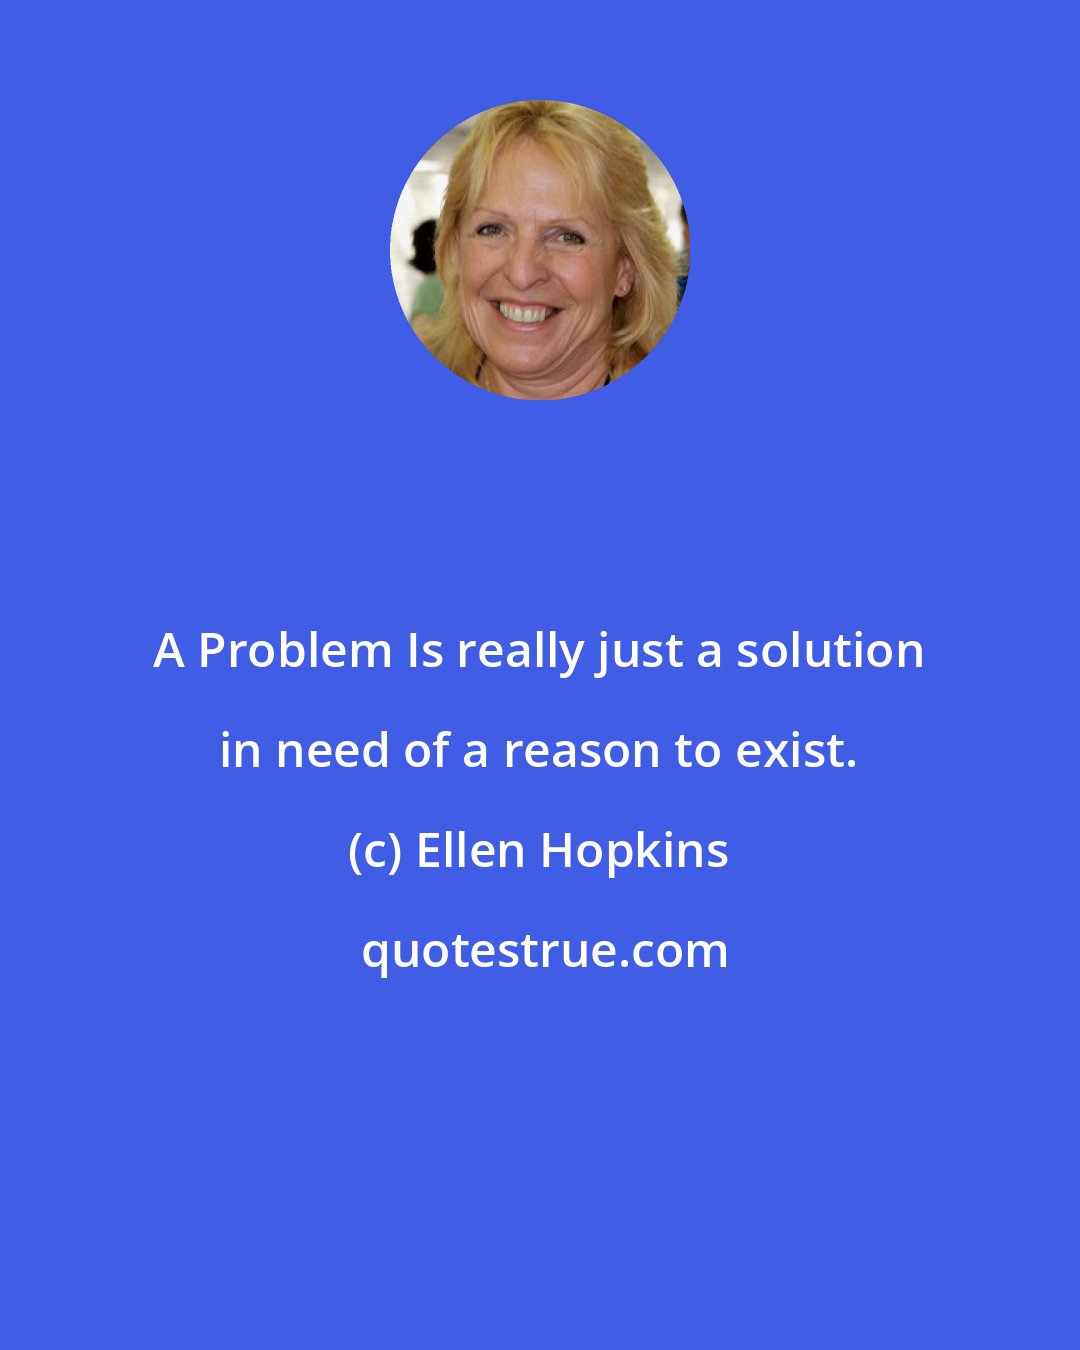 Ellen Hopkins: A Problem Is really just a solution in need of a reason to exist.